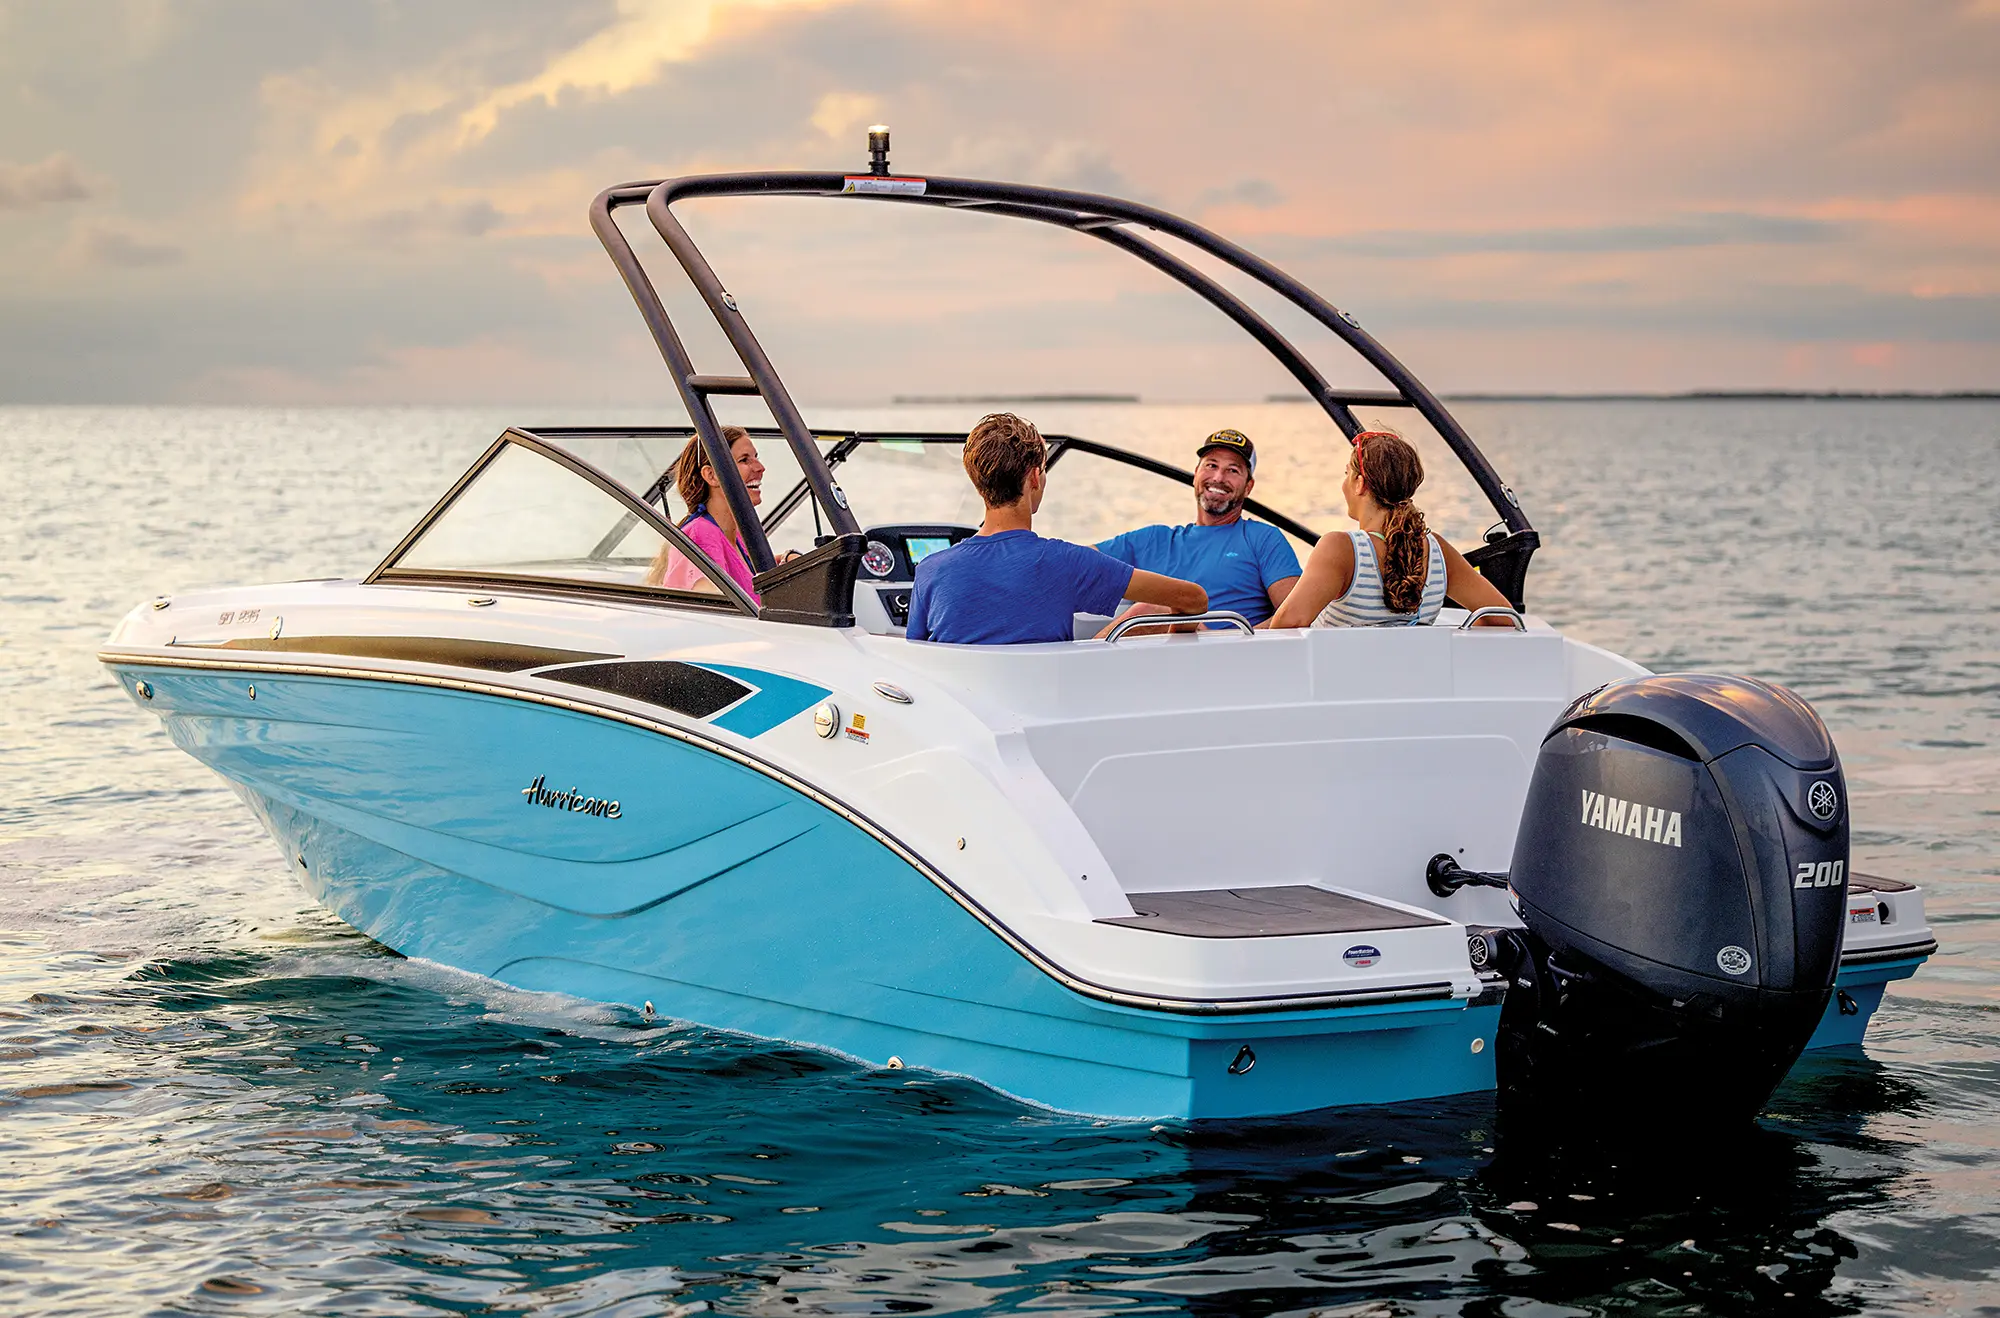 Aerial angle side photo view of the Hurricane SunDeck 235 pontoon motorboat vehicle as a woman, man, a younger boy, and younger girl are all seen smiling and laughing in their beach attire as they all talk amongst each other on a beautiful evening day